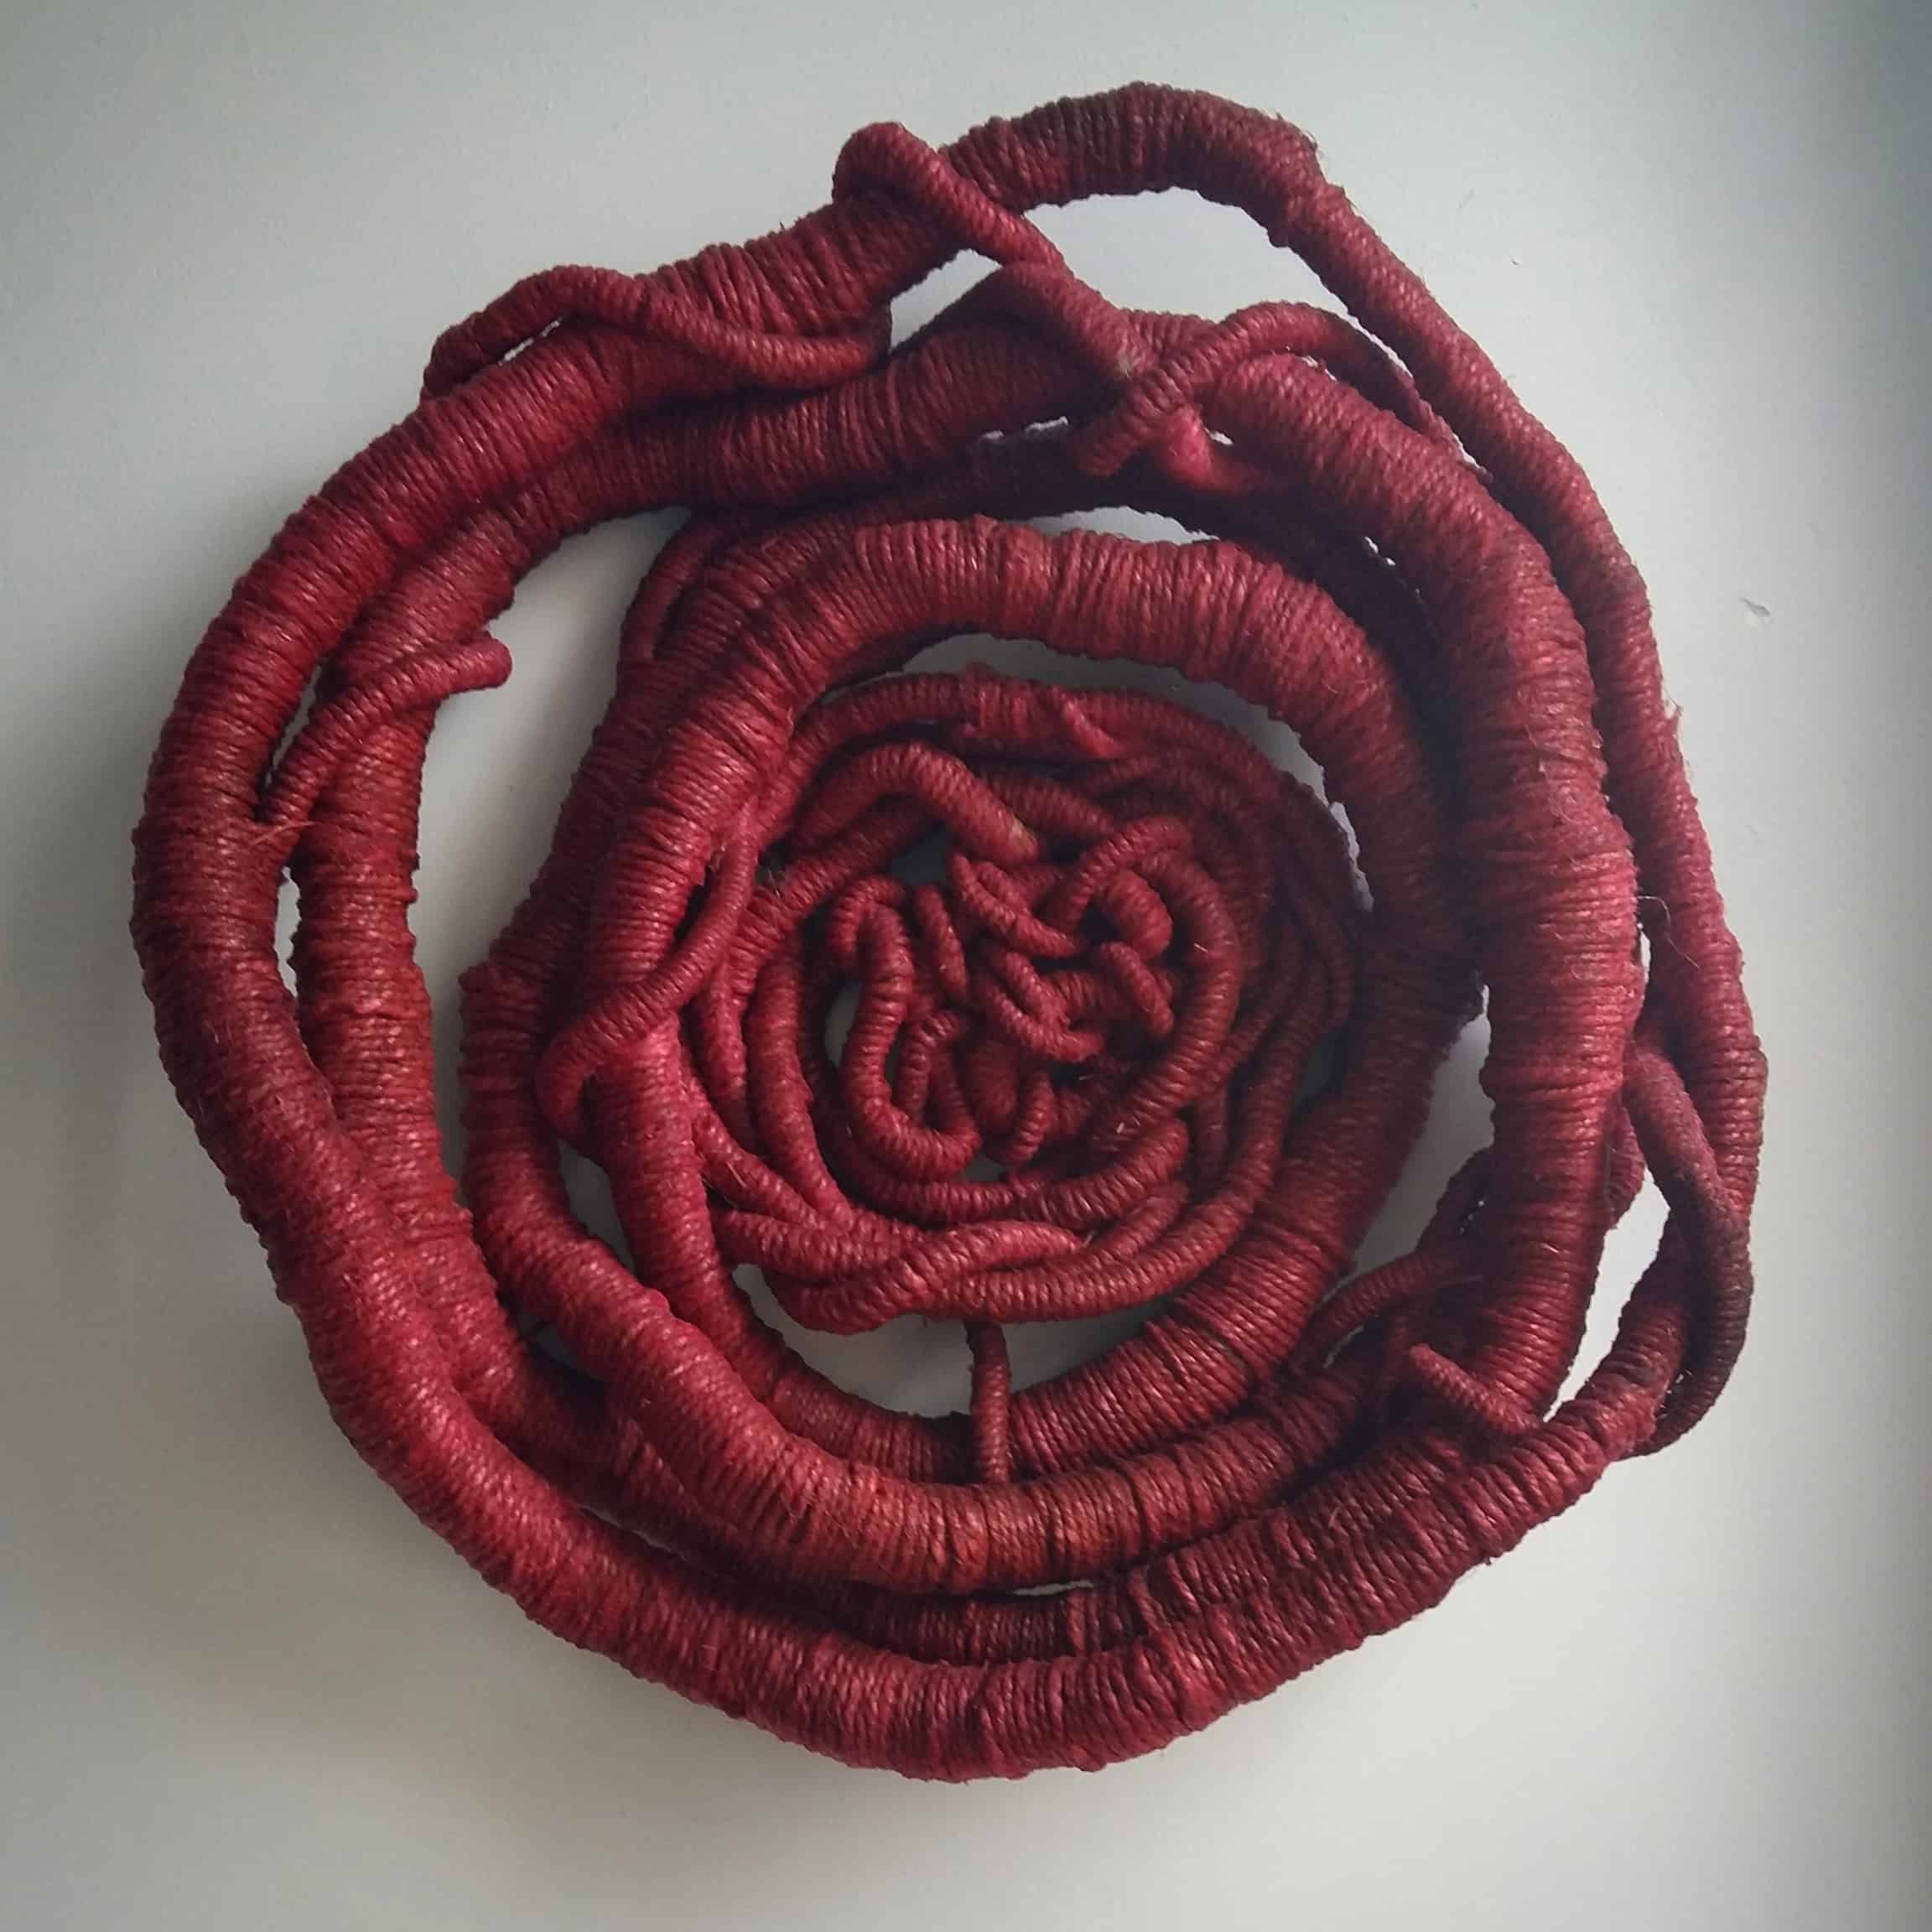 Picture of a red sculpture by artist Aude Franjou. The sculpture looks like a red blossom